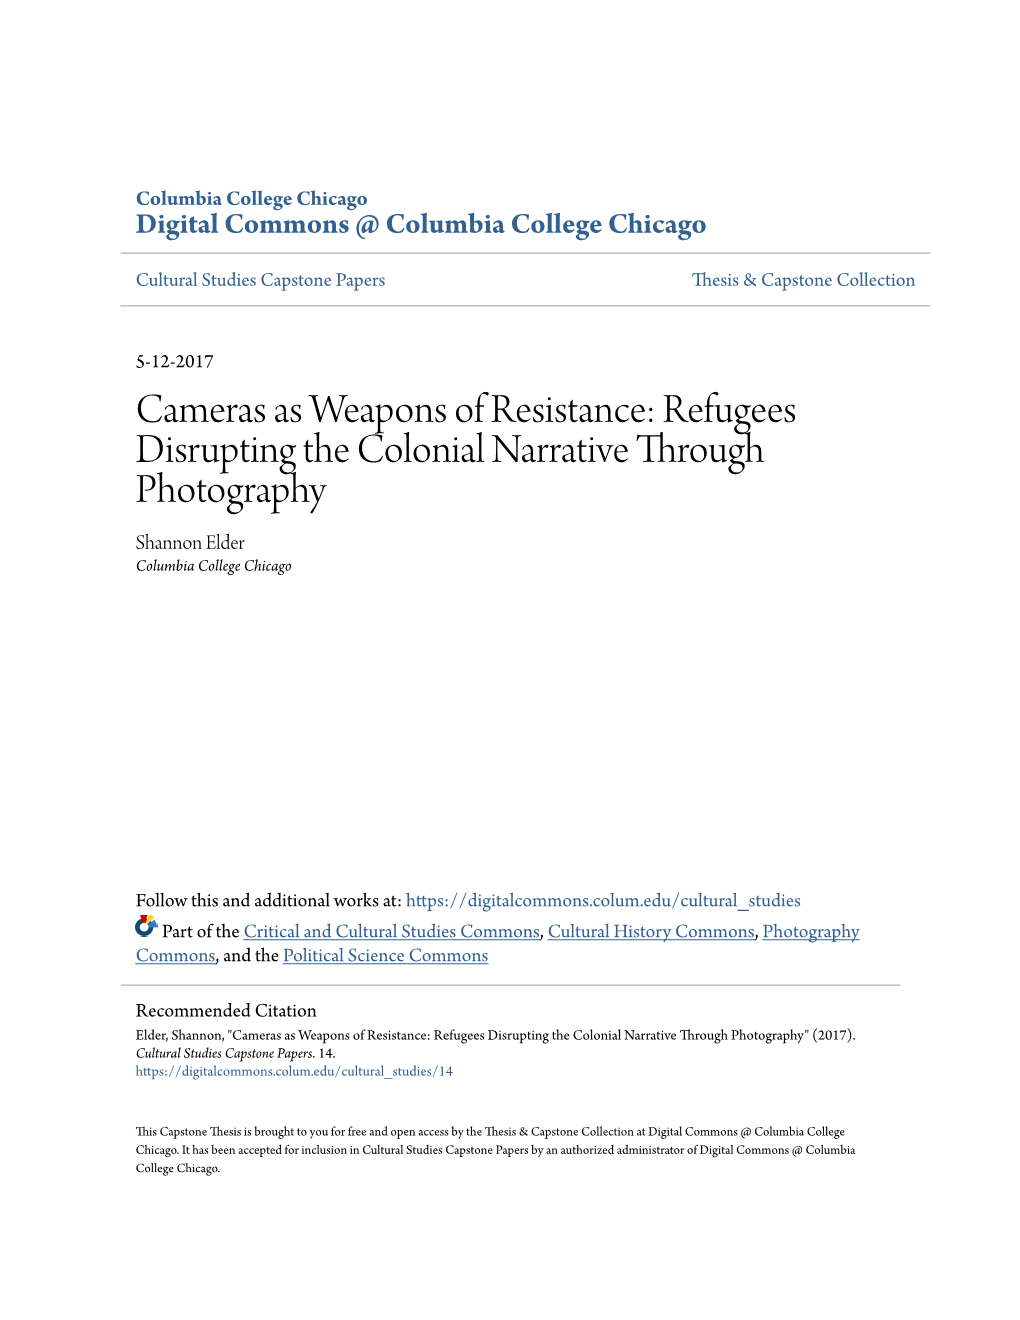 Cameras As Weapons of Resistance: Refugees Disrupting the Colonial Narrative Through Photography Shannon Elder Columbia College Chicago